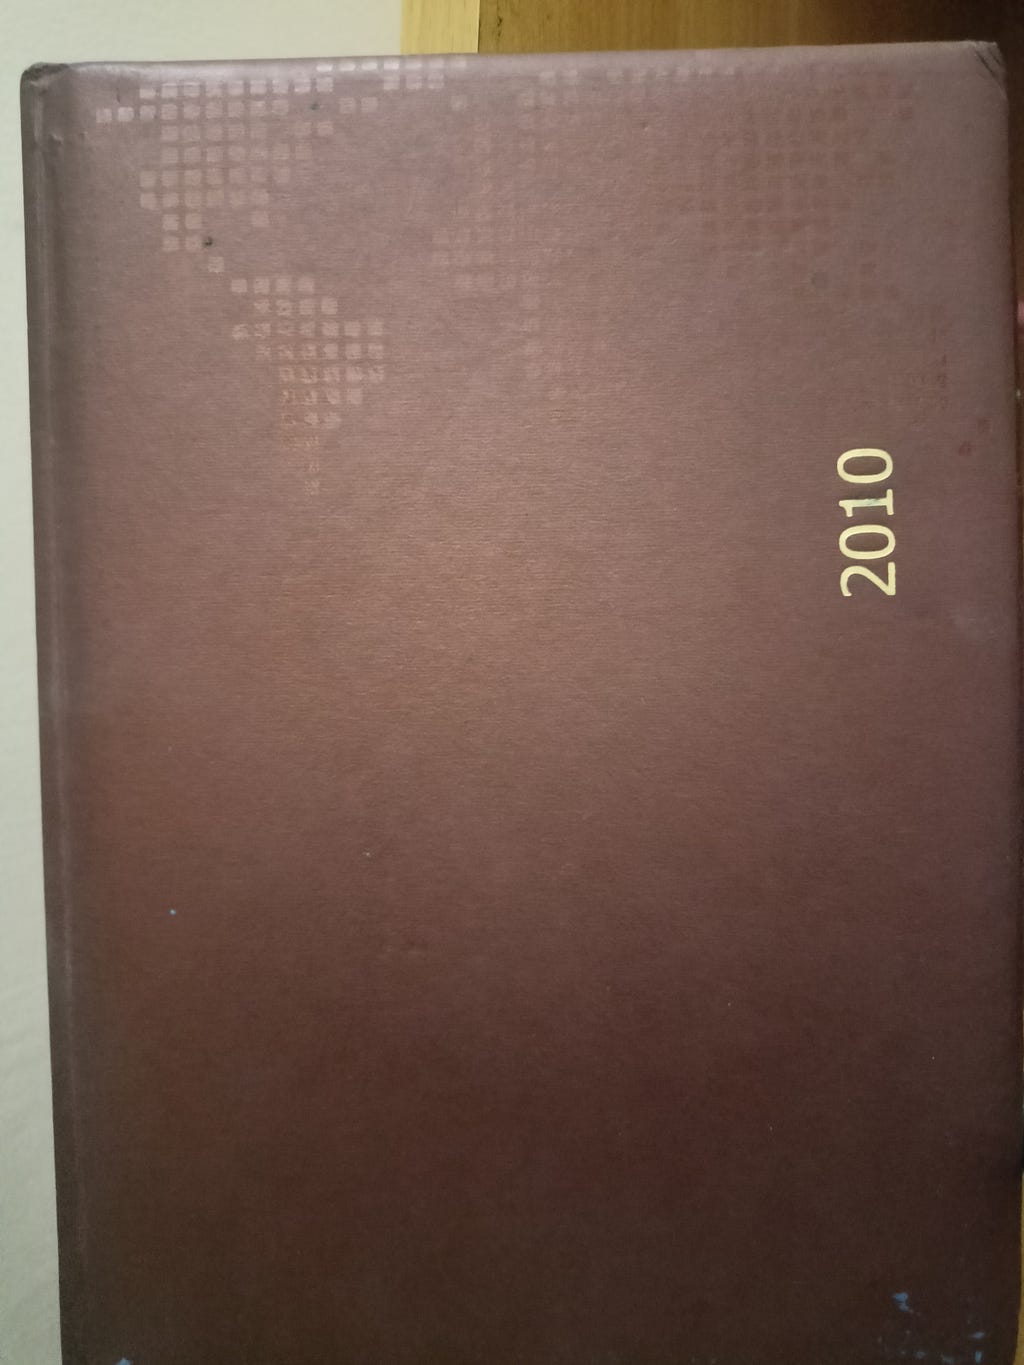 A hard bound diary with 2010 printed on the cover page.